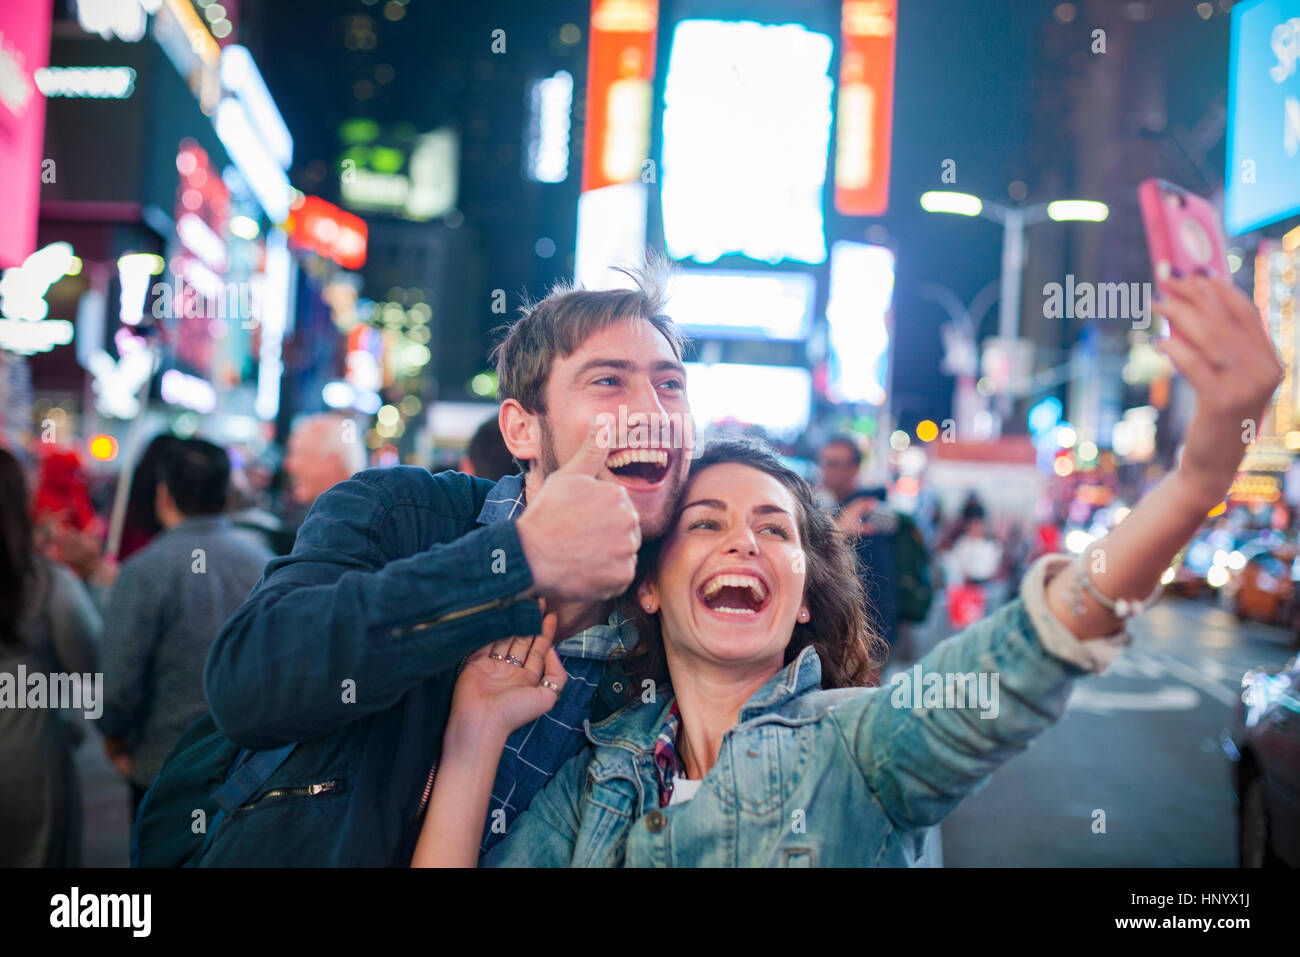 Couple en selfies Times Square, New York City, New York, USA Banque D'Images